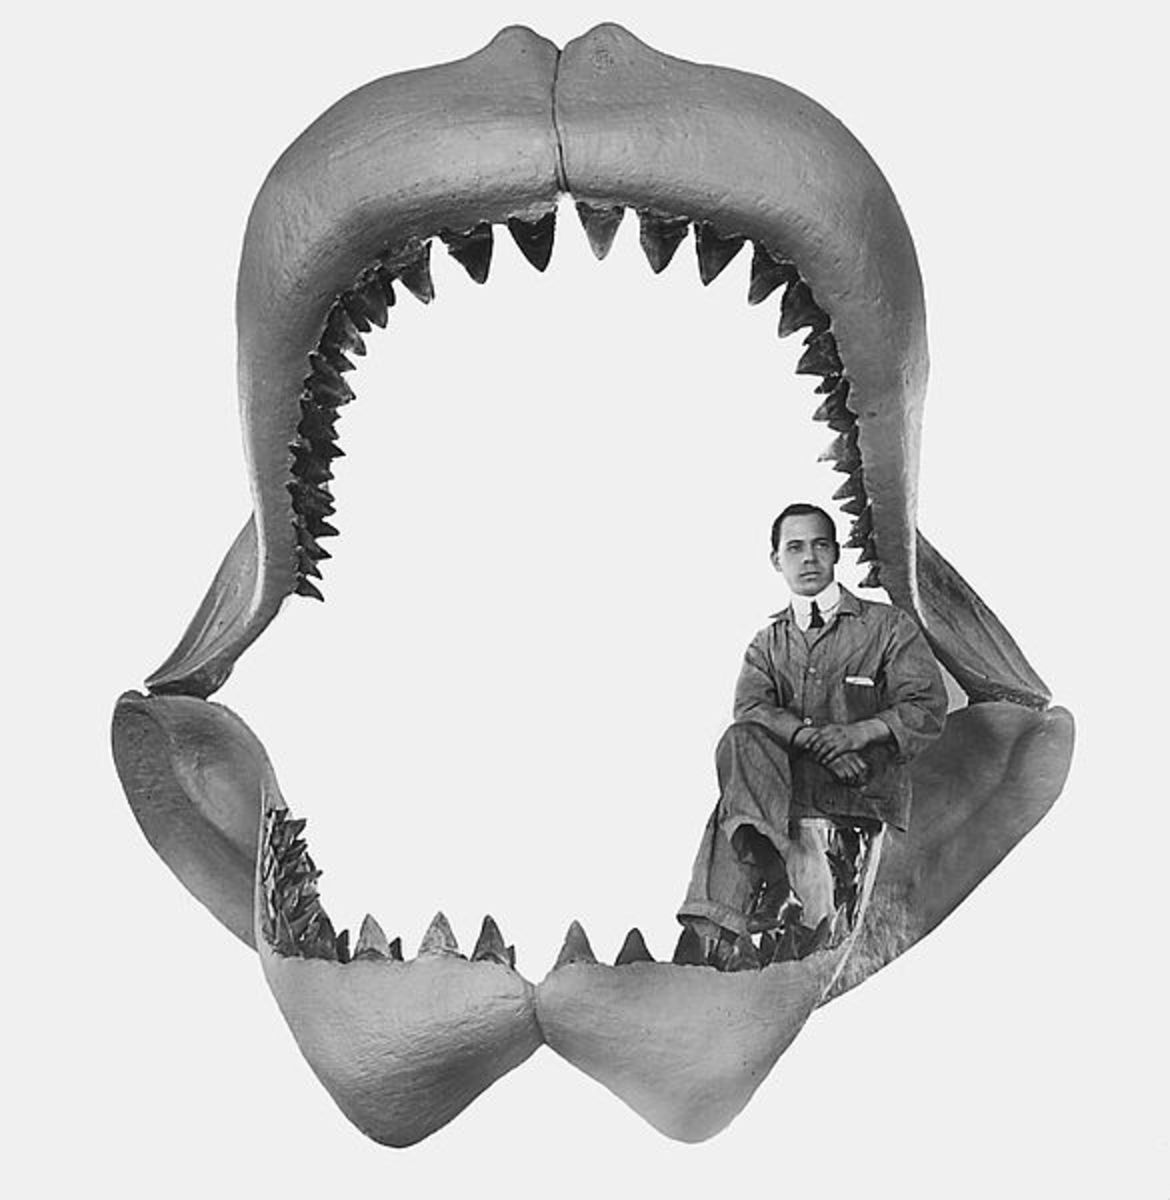 Early reconstruction of Megalodon jaws.